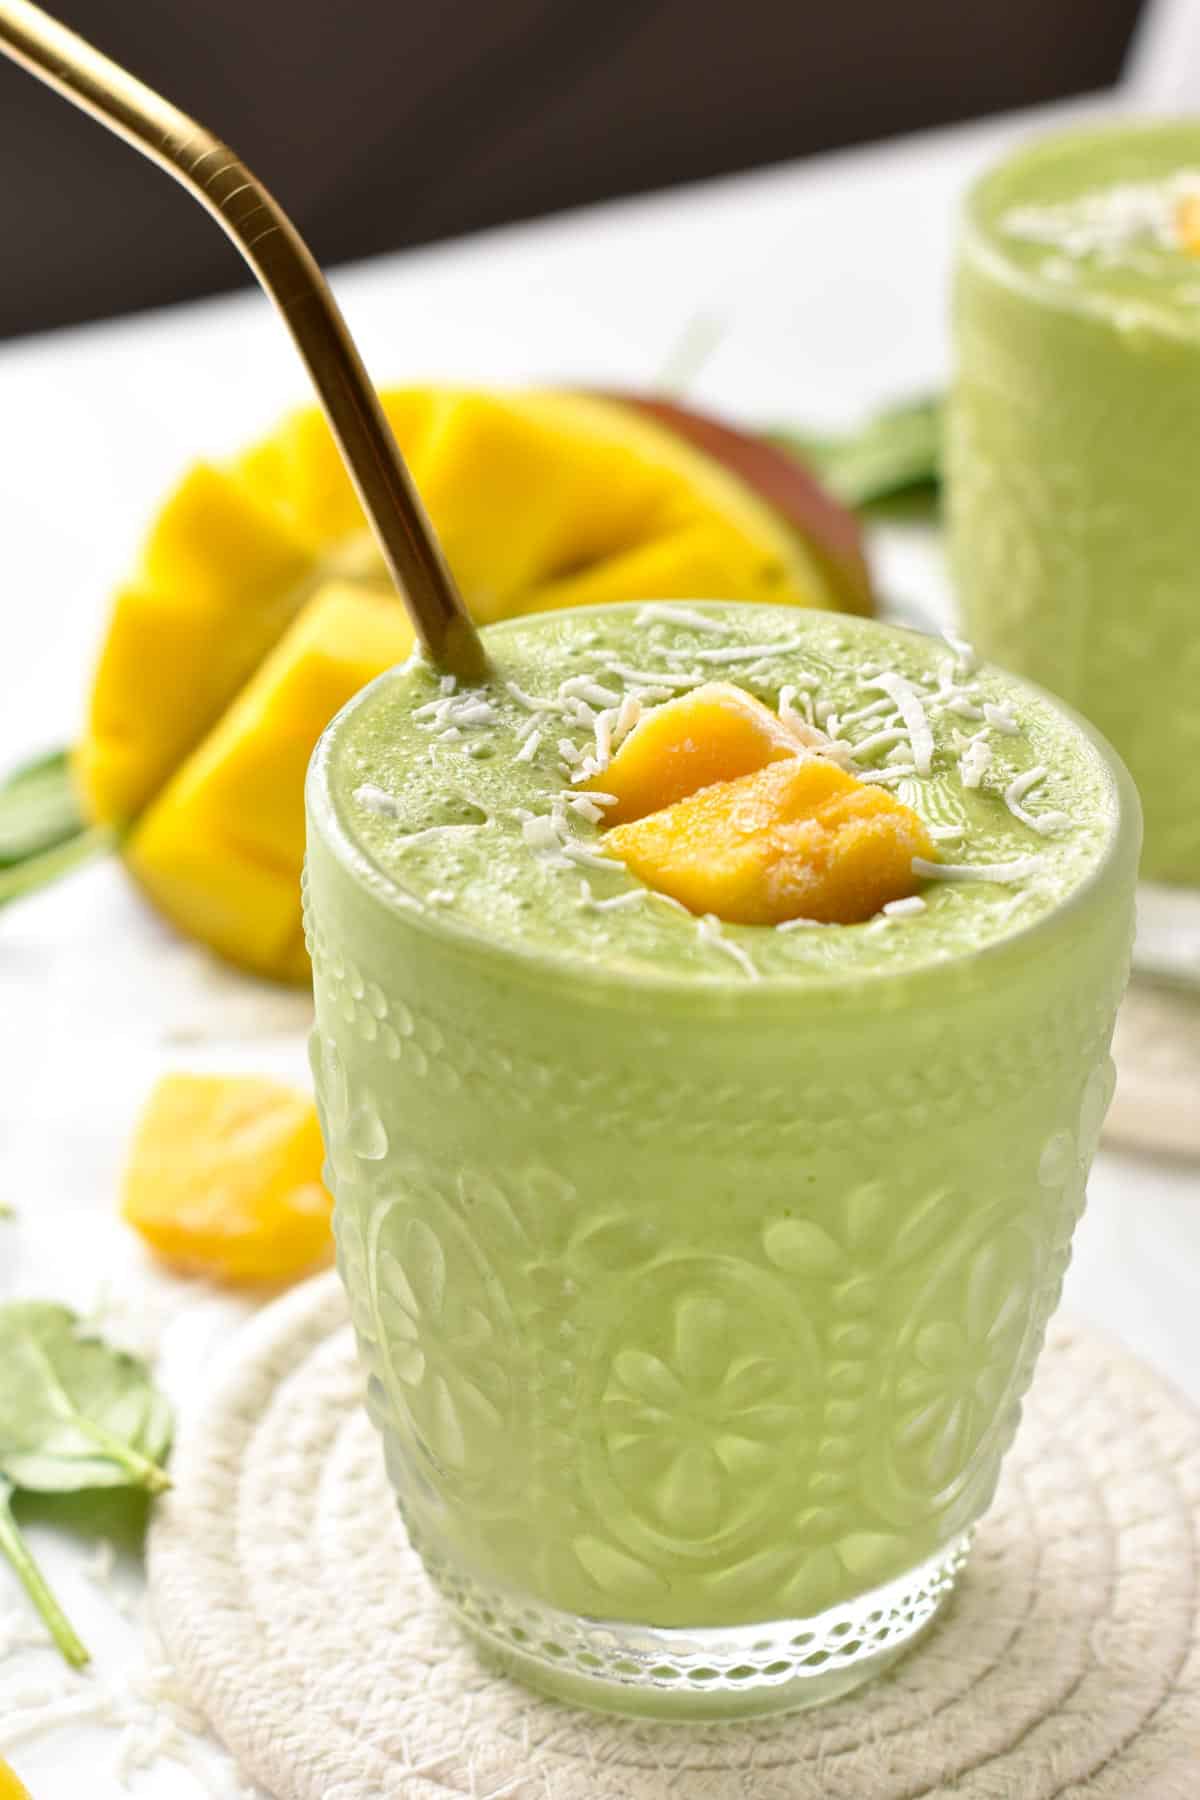 This Mango Spinach Smoothie is a refreshing, smooth, and creamy green smoothie packed with vitamins from leafy greens.